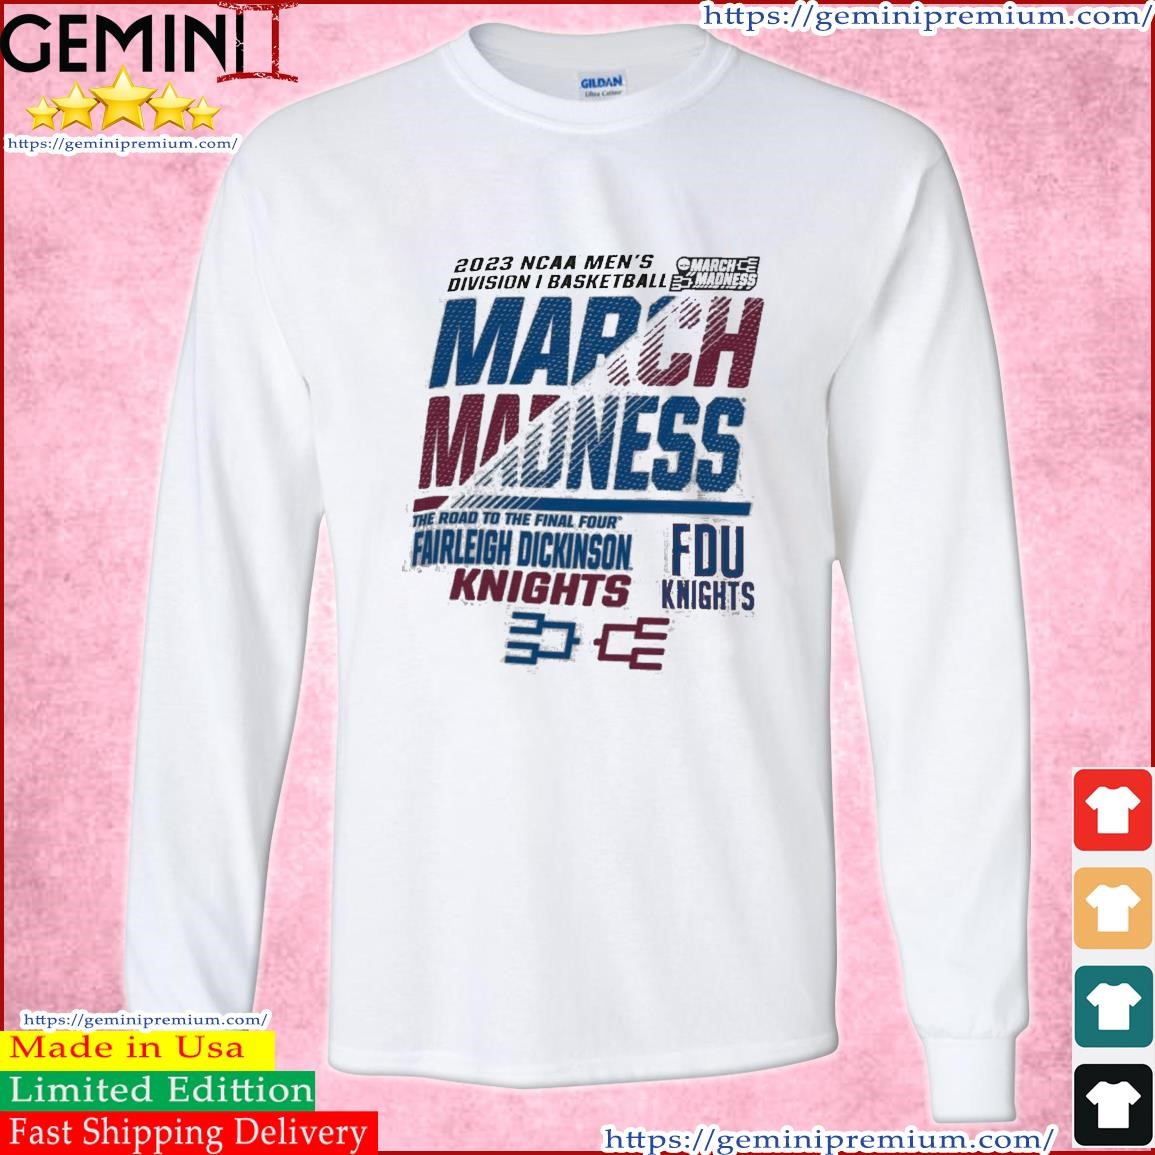 FDU Knights Men's Basketball 2023 NCAA March Madness The Road To Final Four Shirt Long Sleeve Tee.jpg